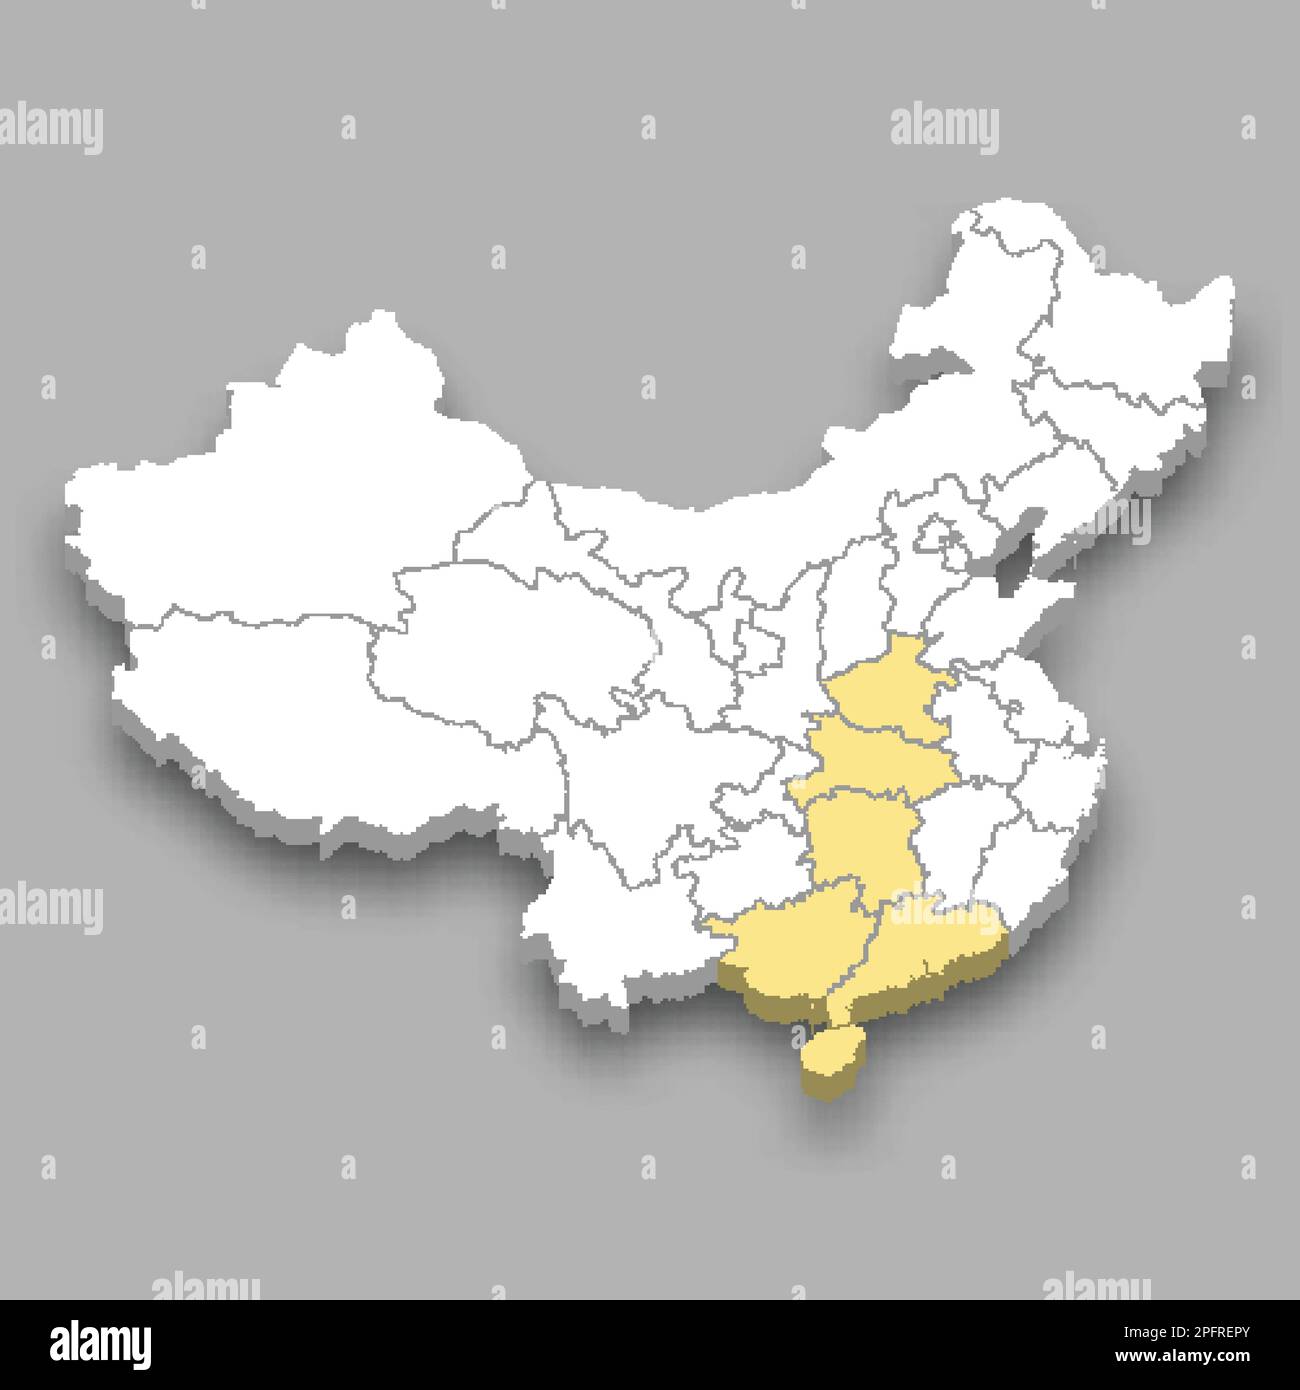 South Central region location within China 3d isometric map Stock Vector